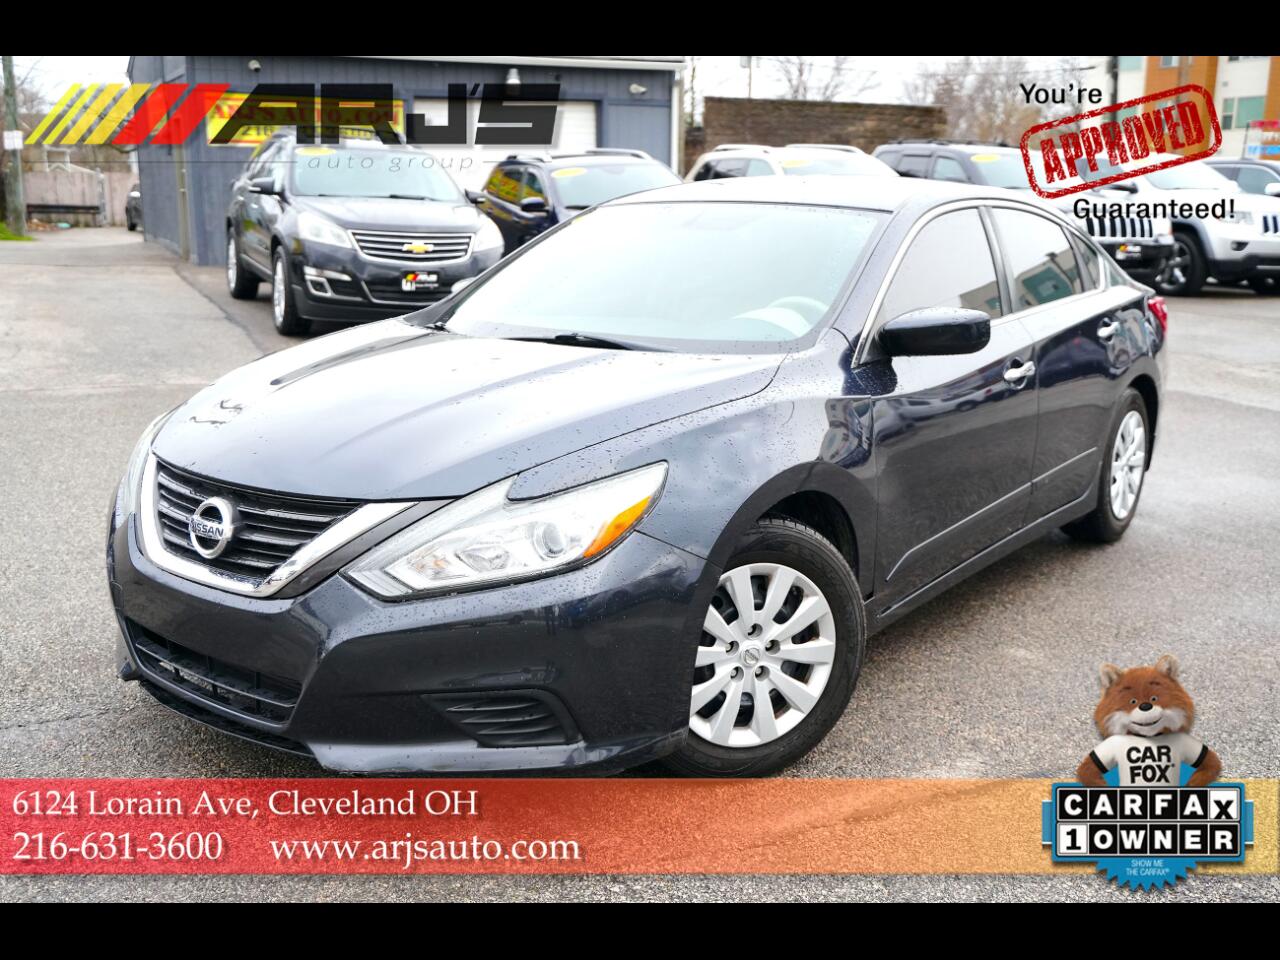 2016 Nissan Altima Cleveland OH